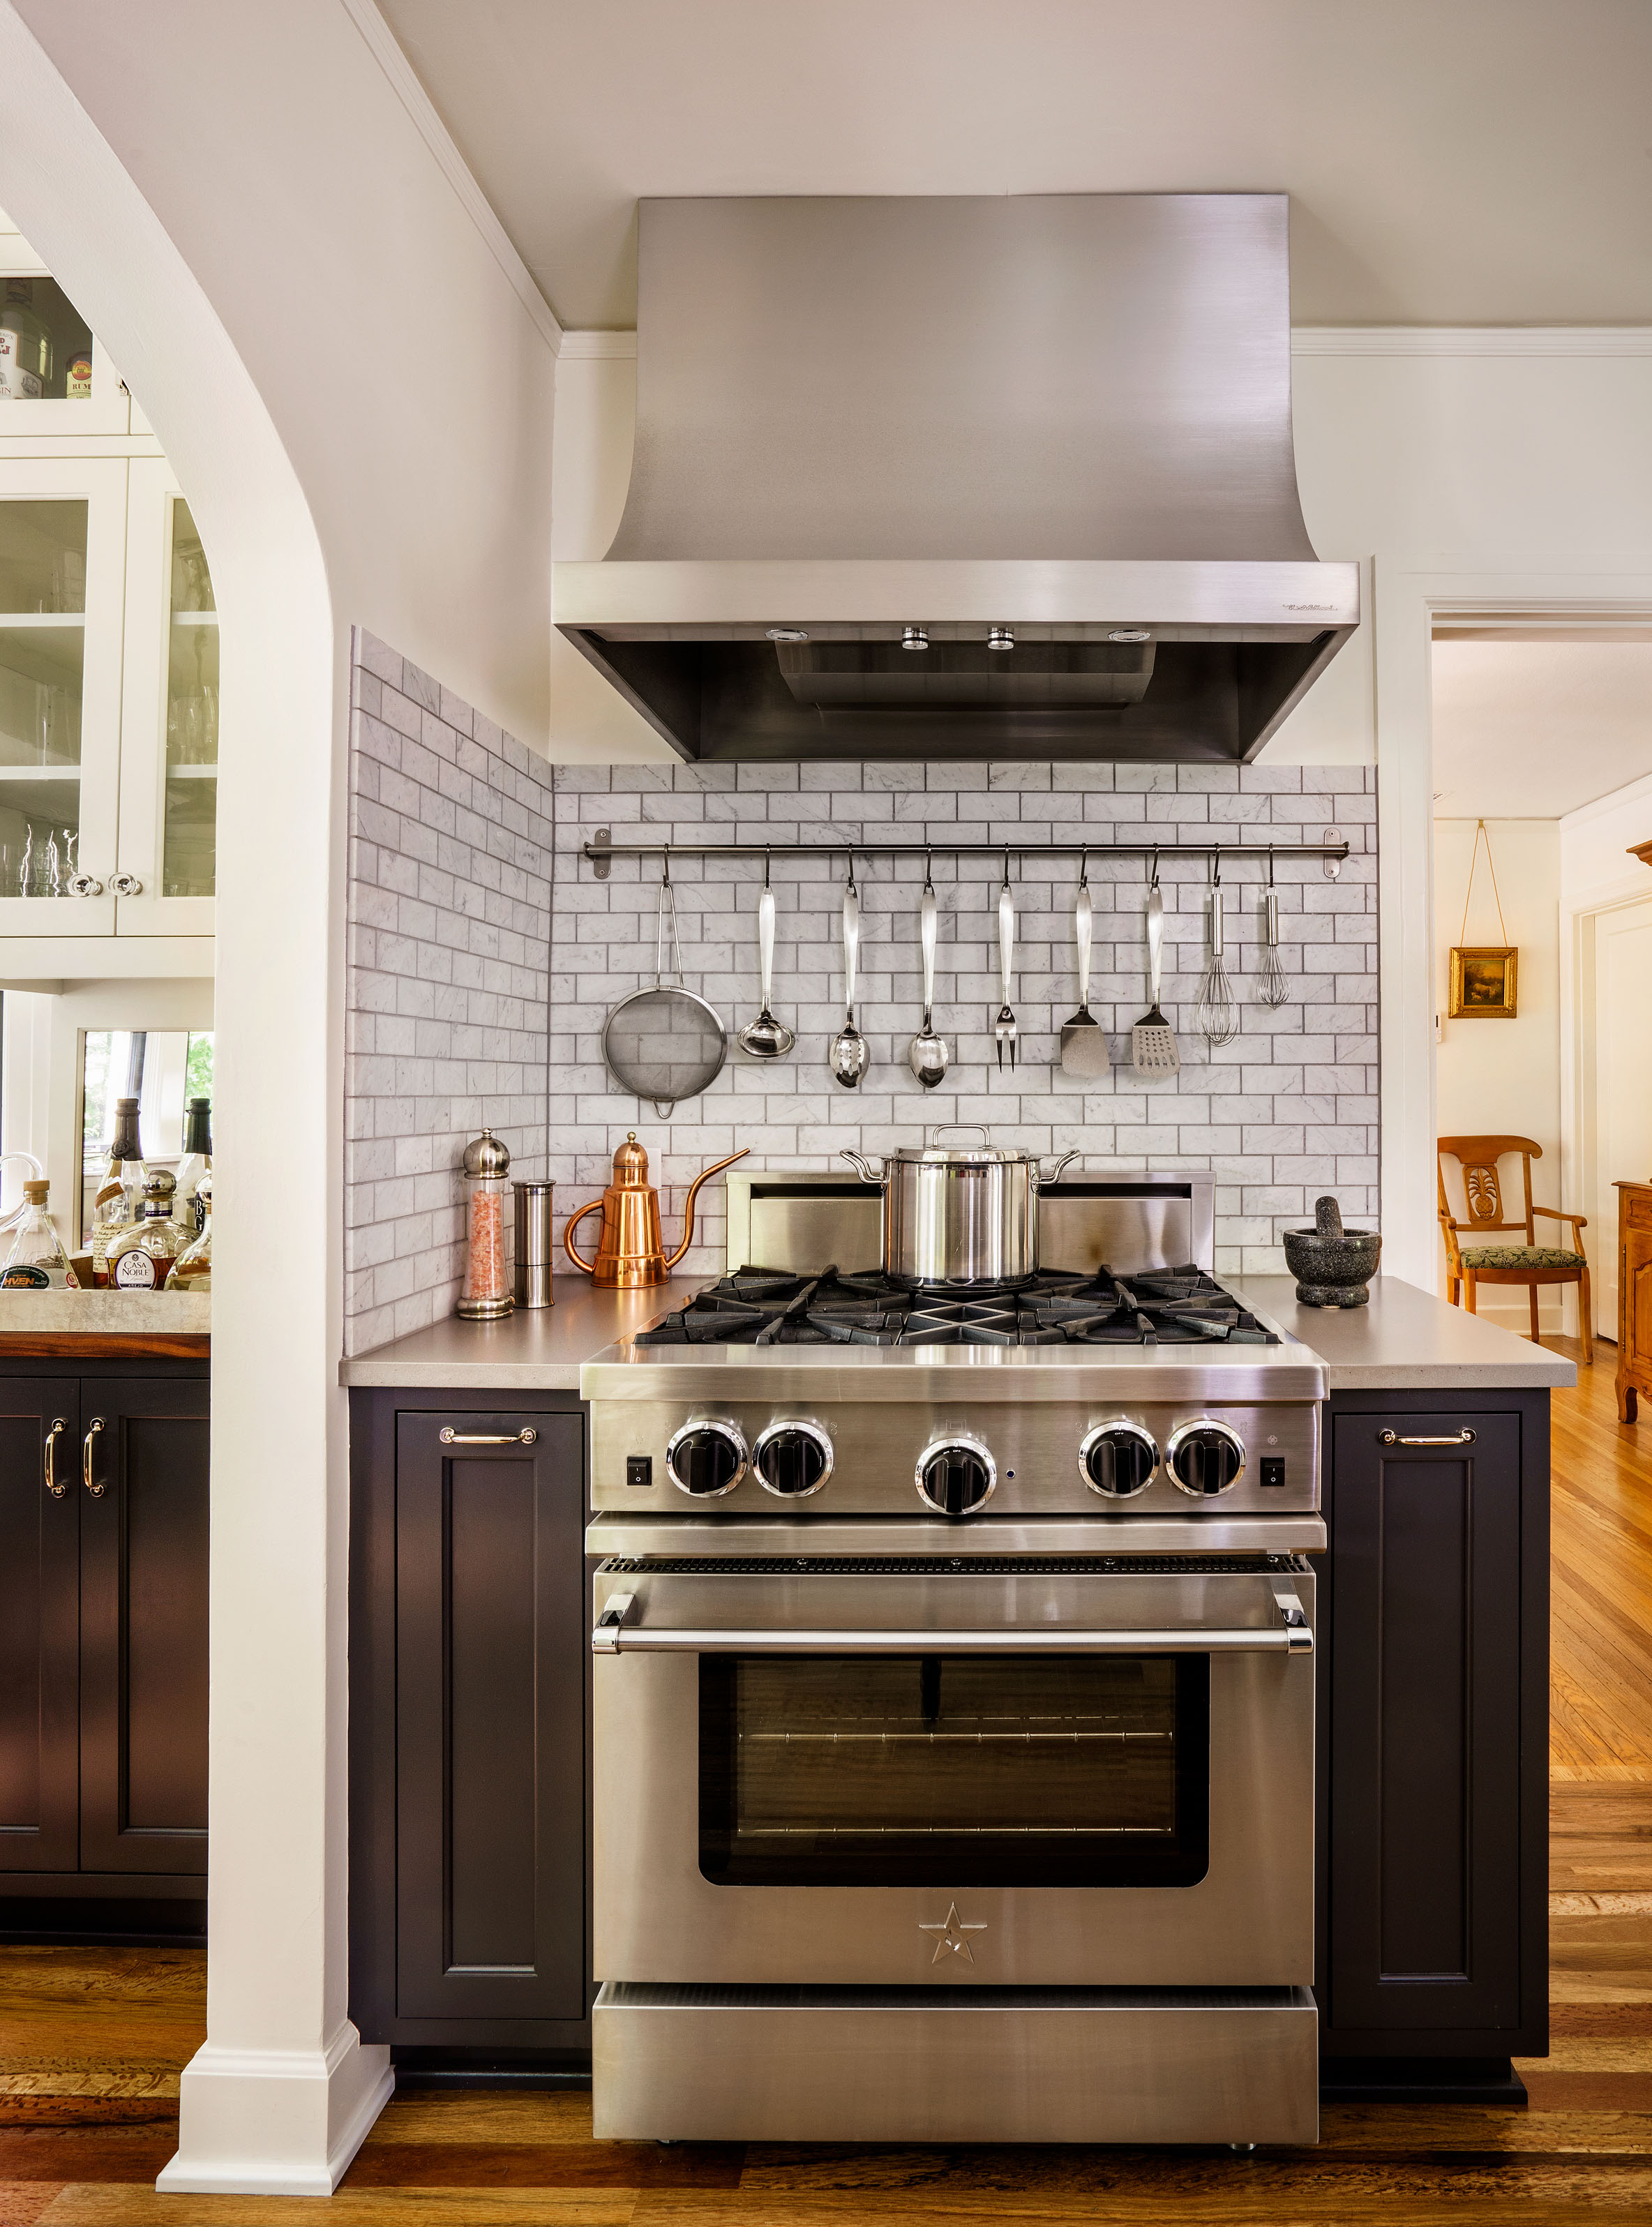 Stainless steel adds to chef's kitchen style.